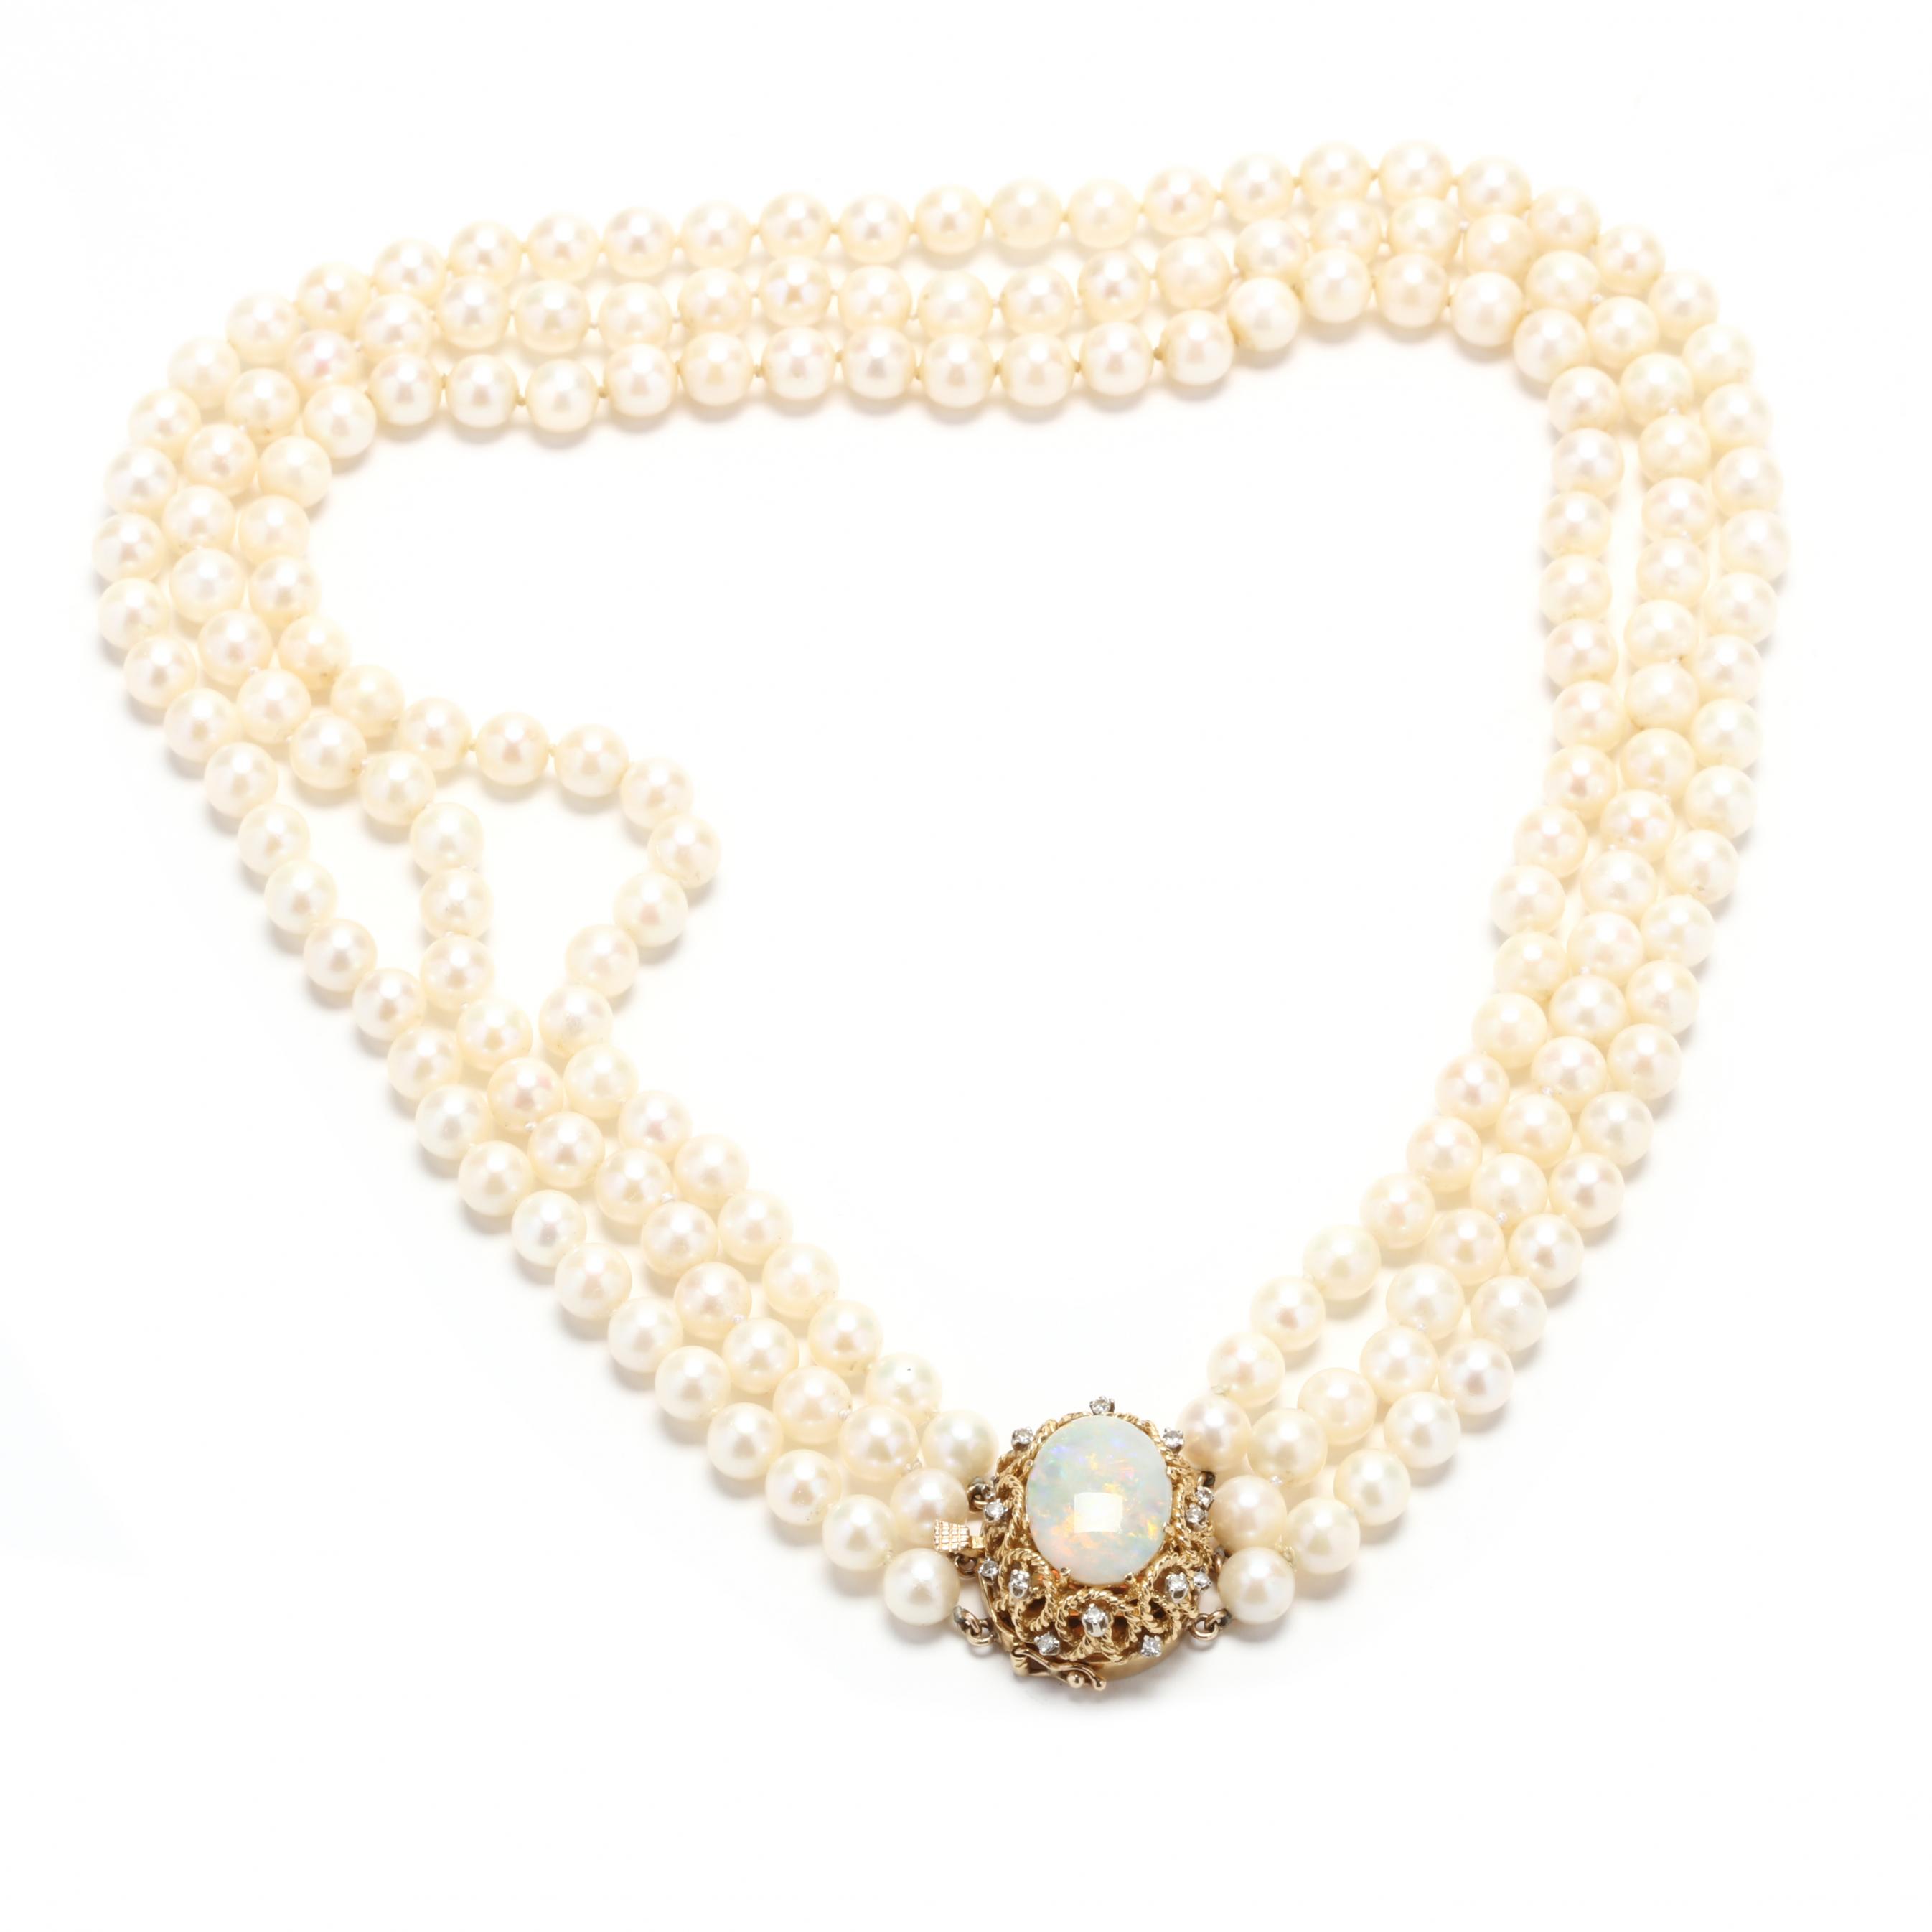 Golden South Sea Cultured Pearl and Opal Pendant